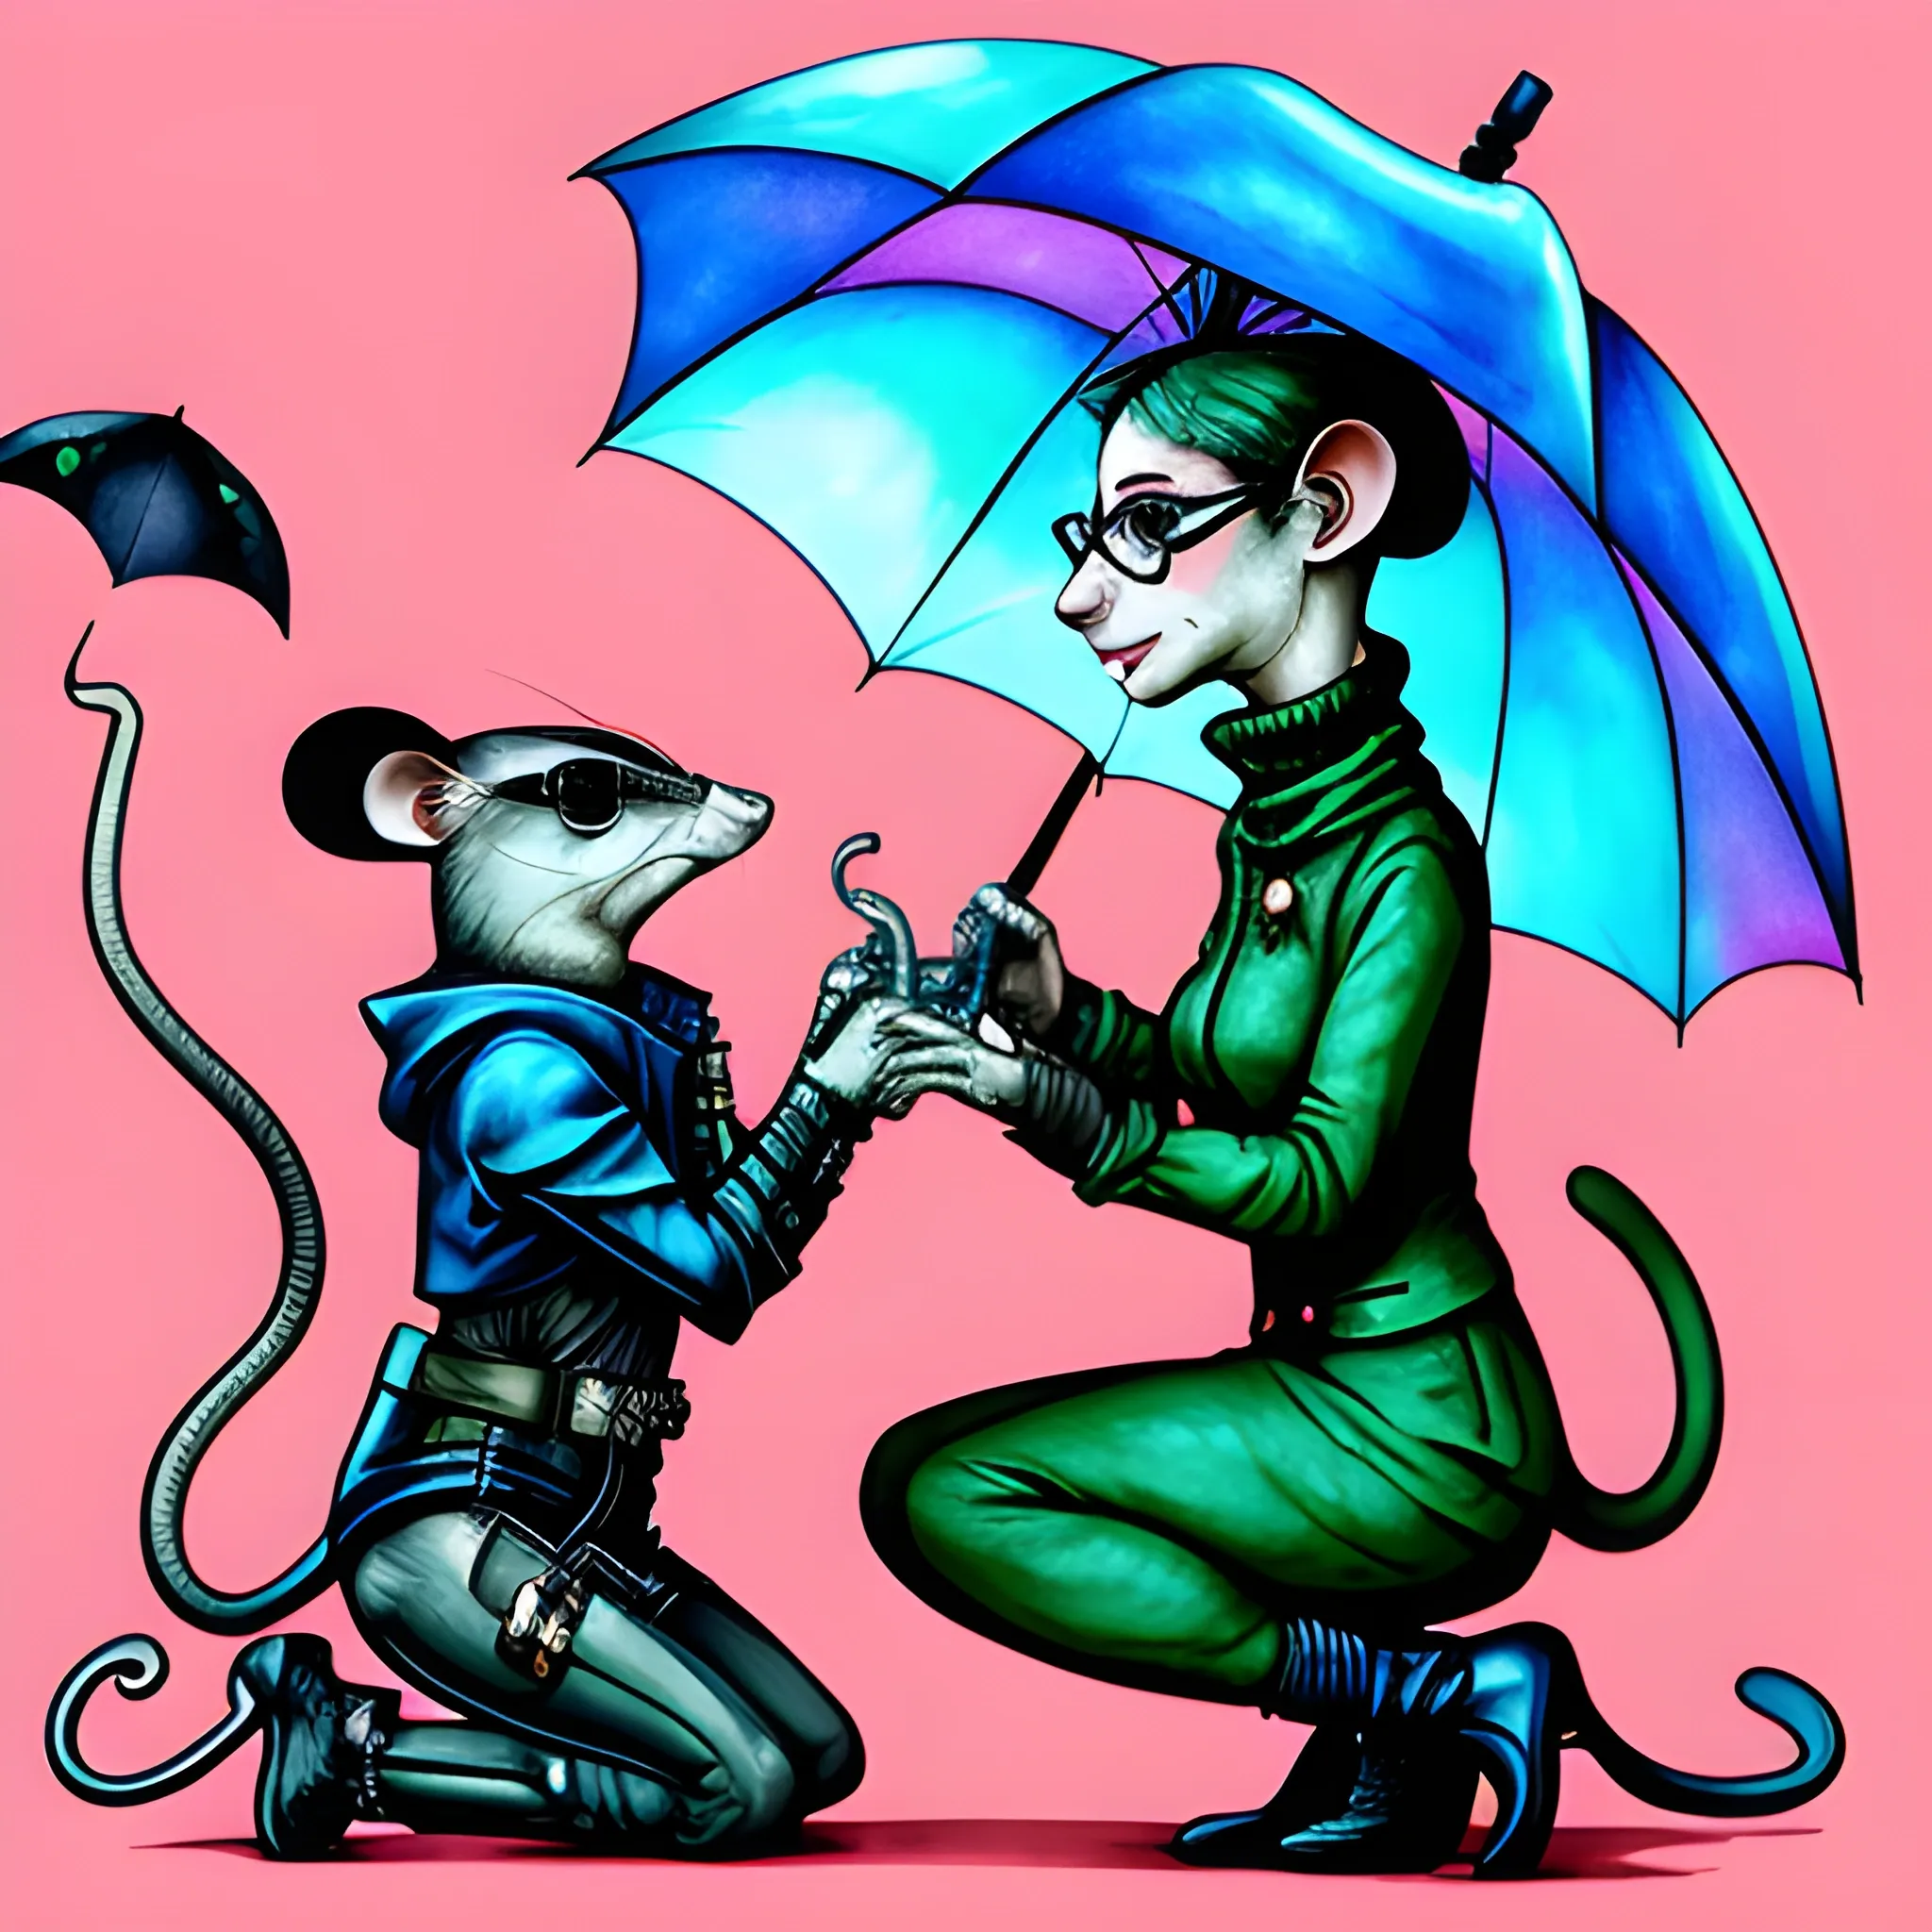 
mouse, with glasses, on knees, gives engagement ring to cyberpunk rat female, with umbrella, background transparent, Water Color, marine style
